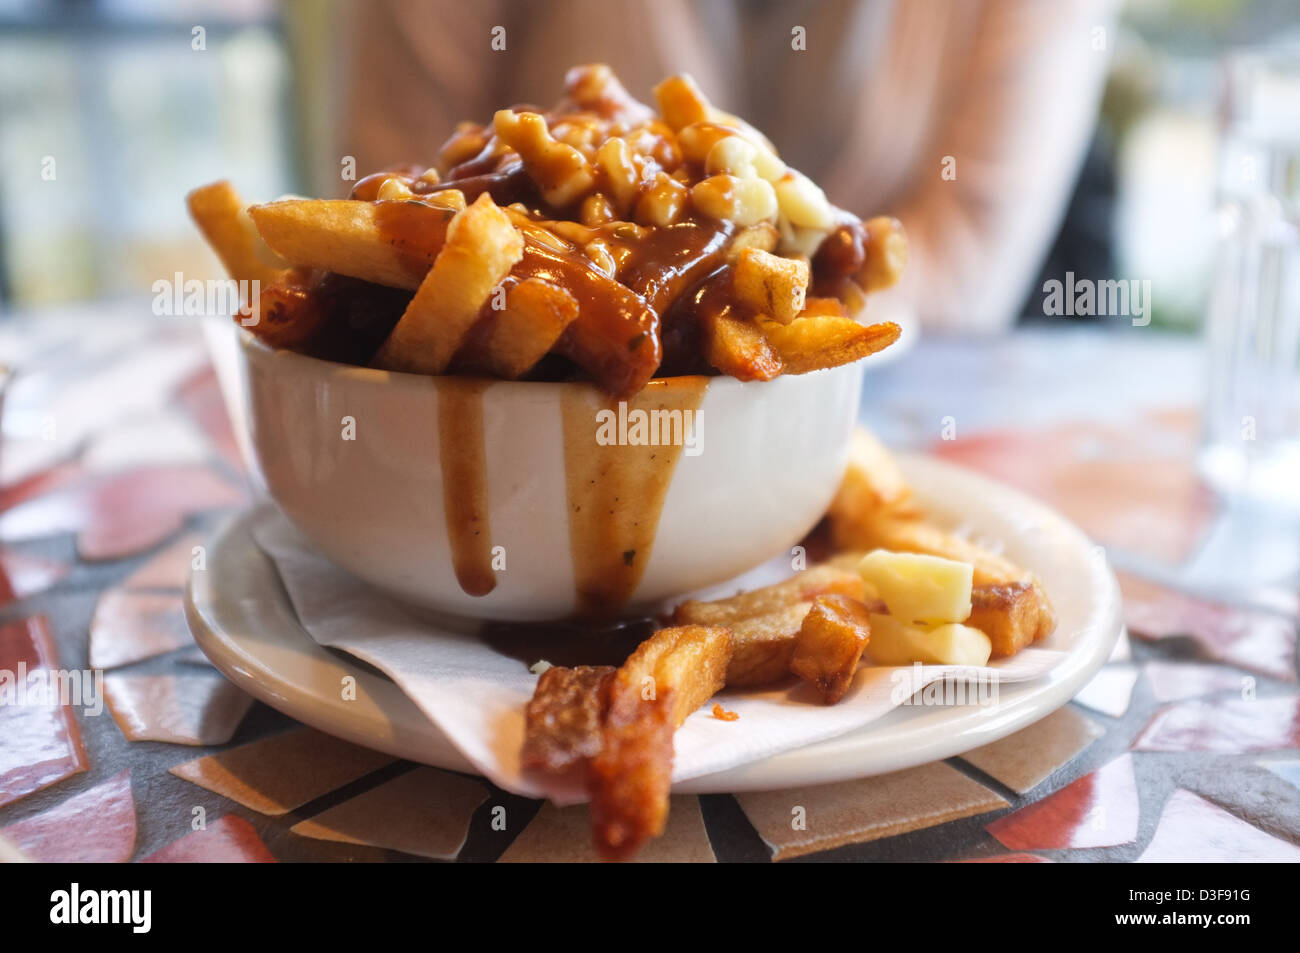 Poutine Is A Fast Food That Originated In Quebec Canada Stock Photo Alamy